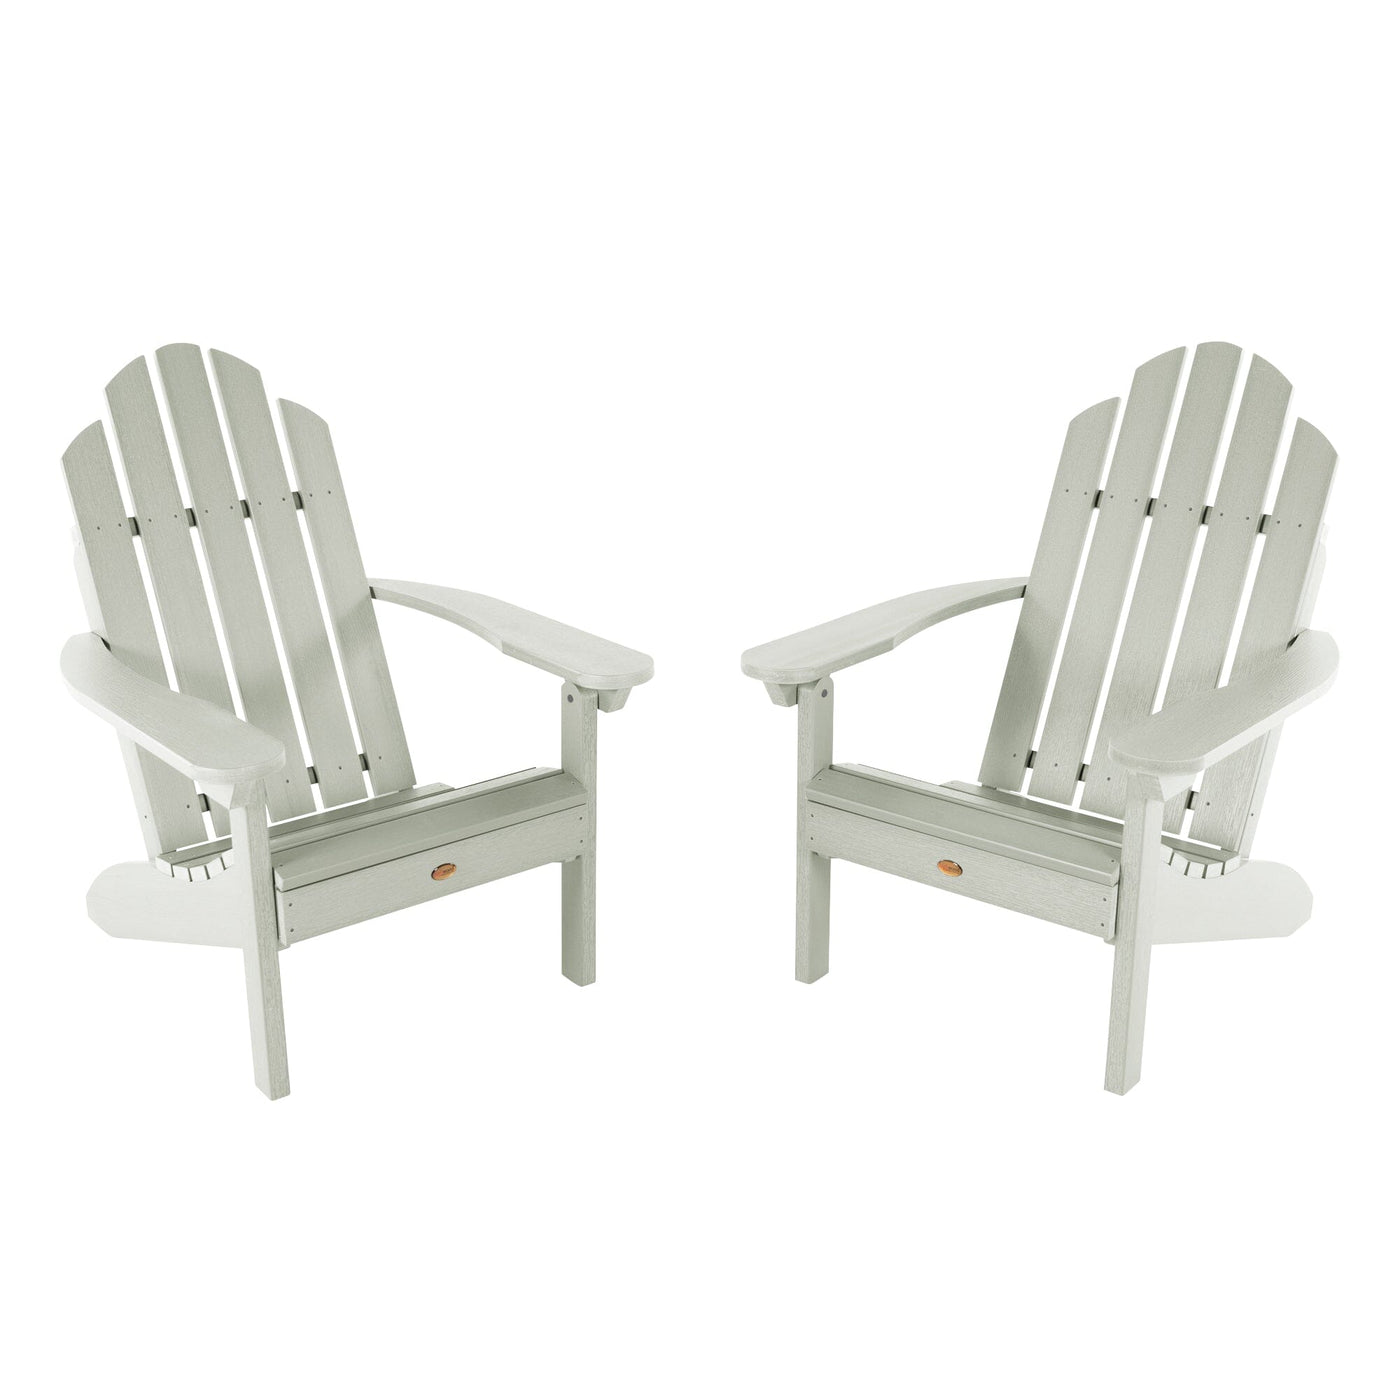 Set of Two Classic Westport Adirondack Chairs Kitted Sets Highwood USA Eucalyptus 